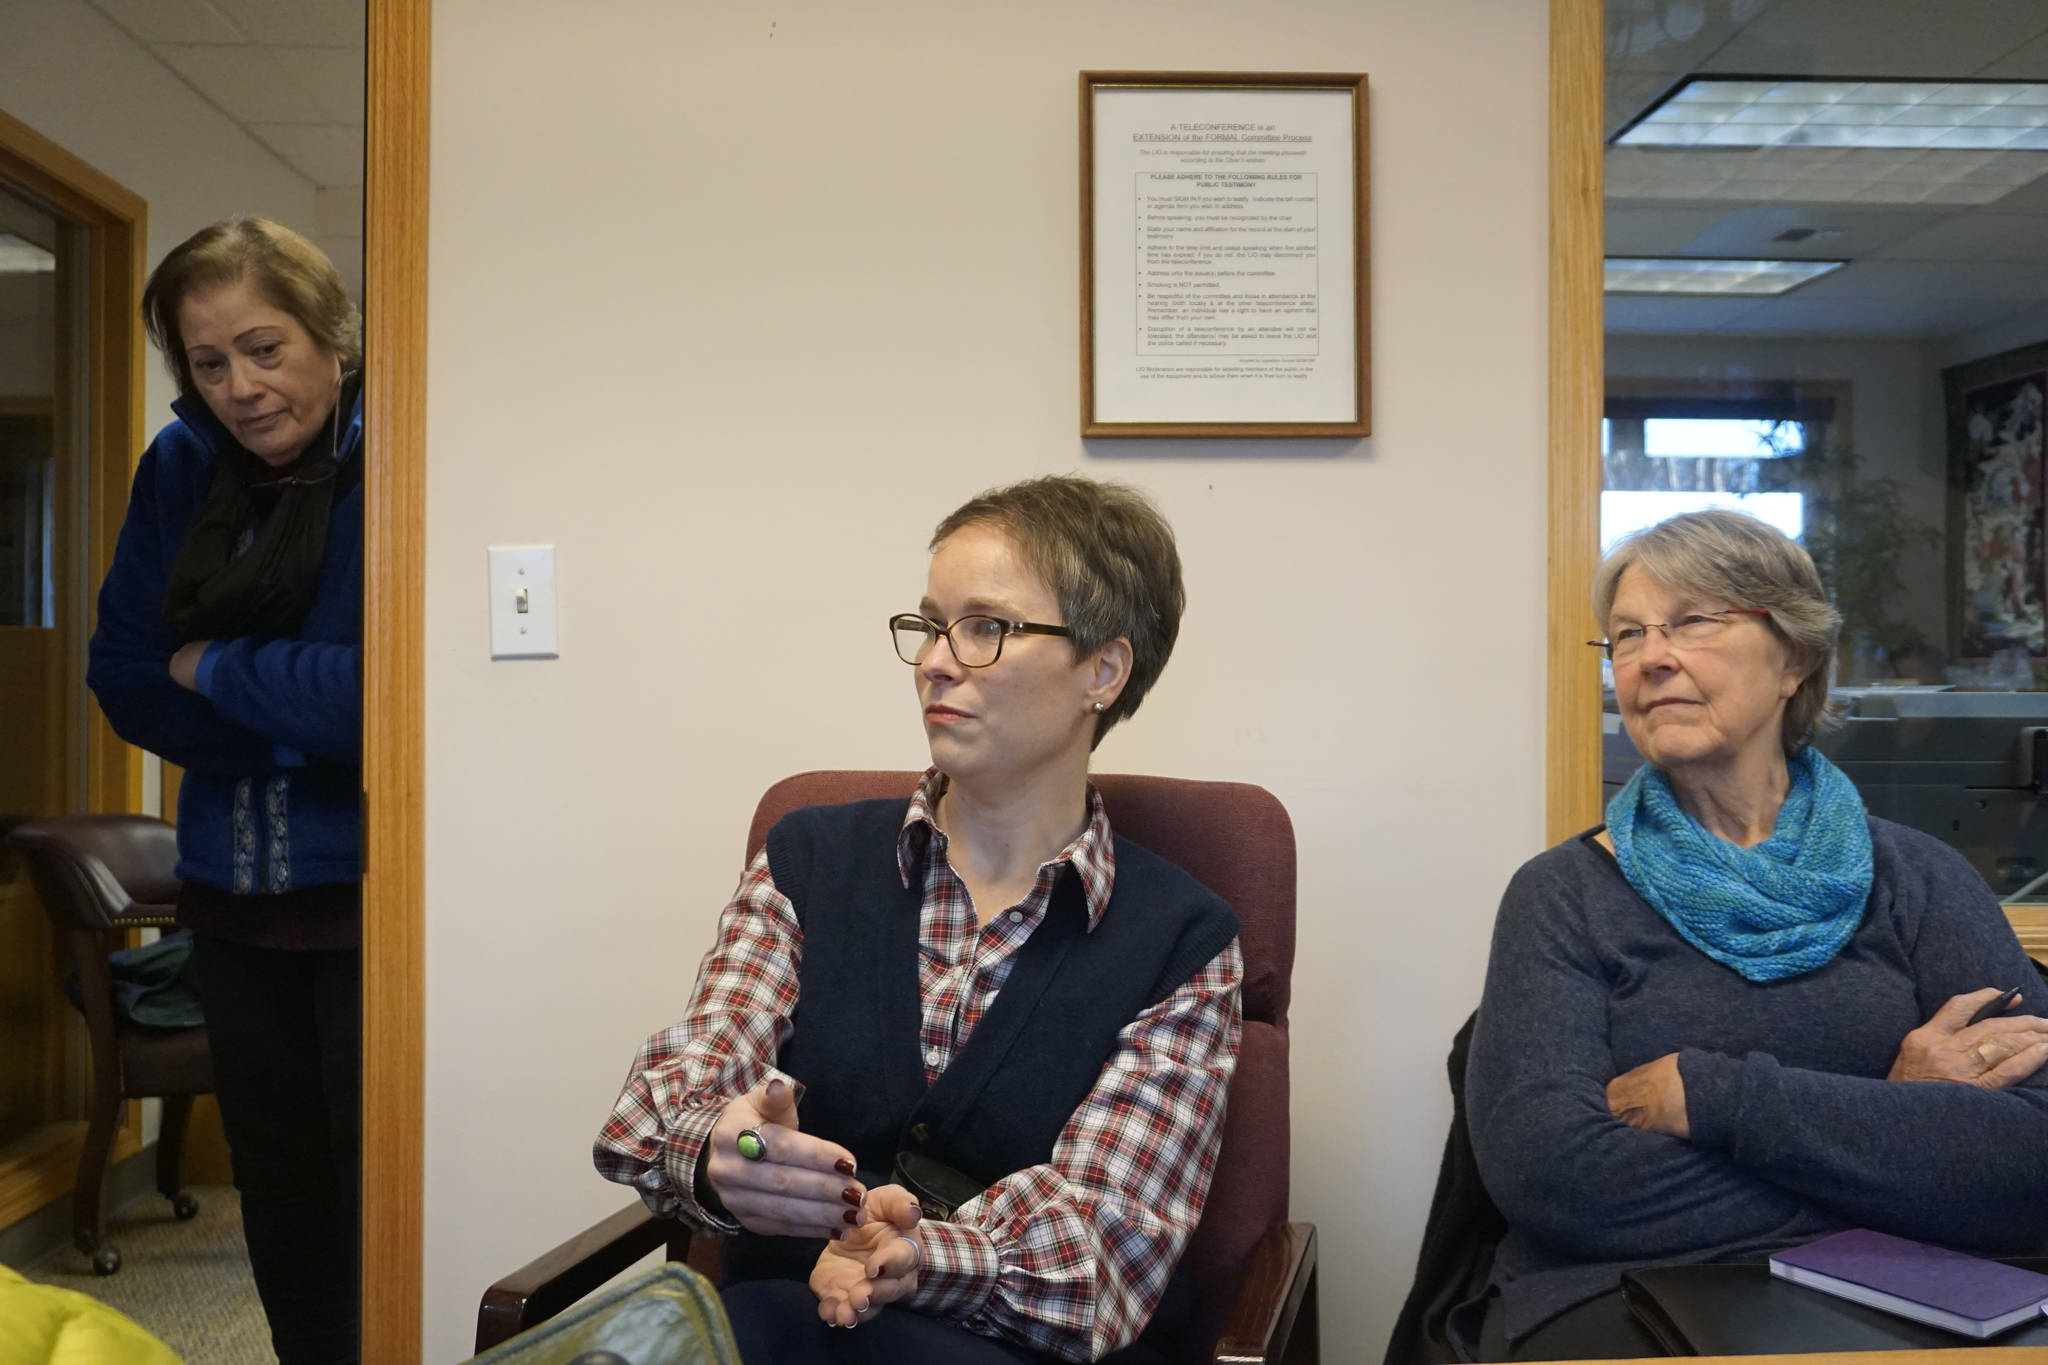 Rep.-elect Sarah Vance, R-Homer, speaks at a meeting on Thursday, Jan. 3, 2019, at the Homer Legislative Information Office in Homer, Alaska. Ardith Mumma, right, and Barn Angaiak, left, listen. As she headed to Juneau for the next session of the Alaska Legislature, Vance held meetings in Homer, Anchor Point, Ninilchik and Kasilof last weekend. (Photo by Michael Armstrong/Homer News)